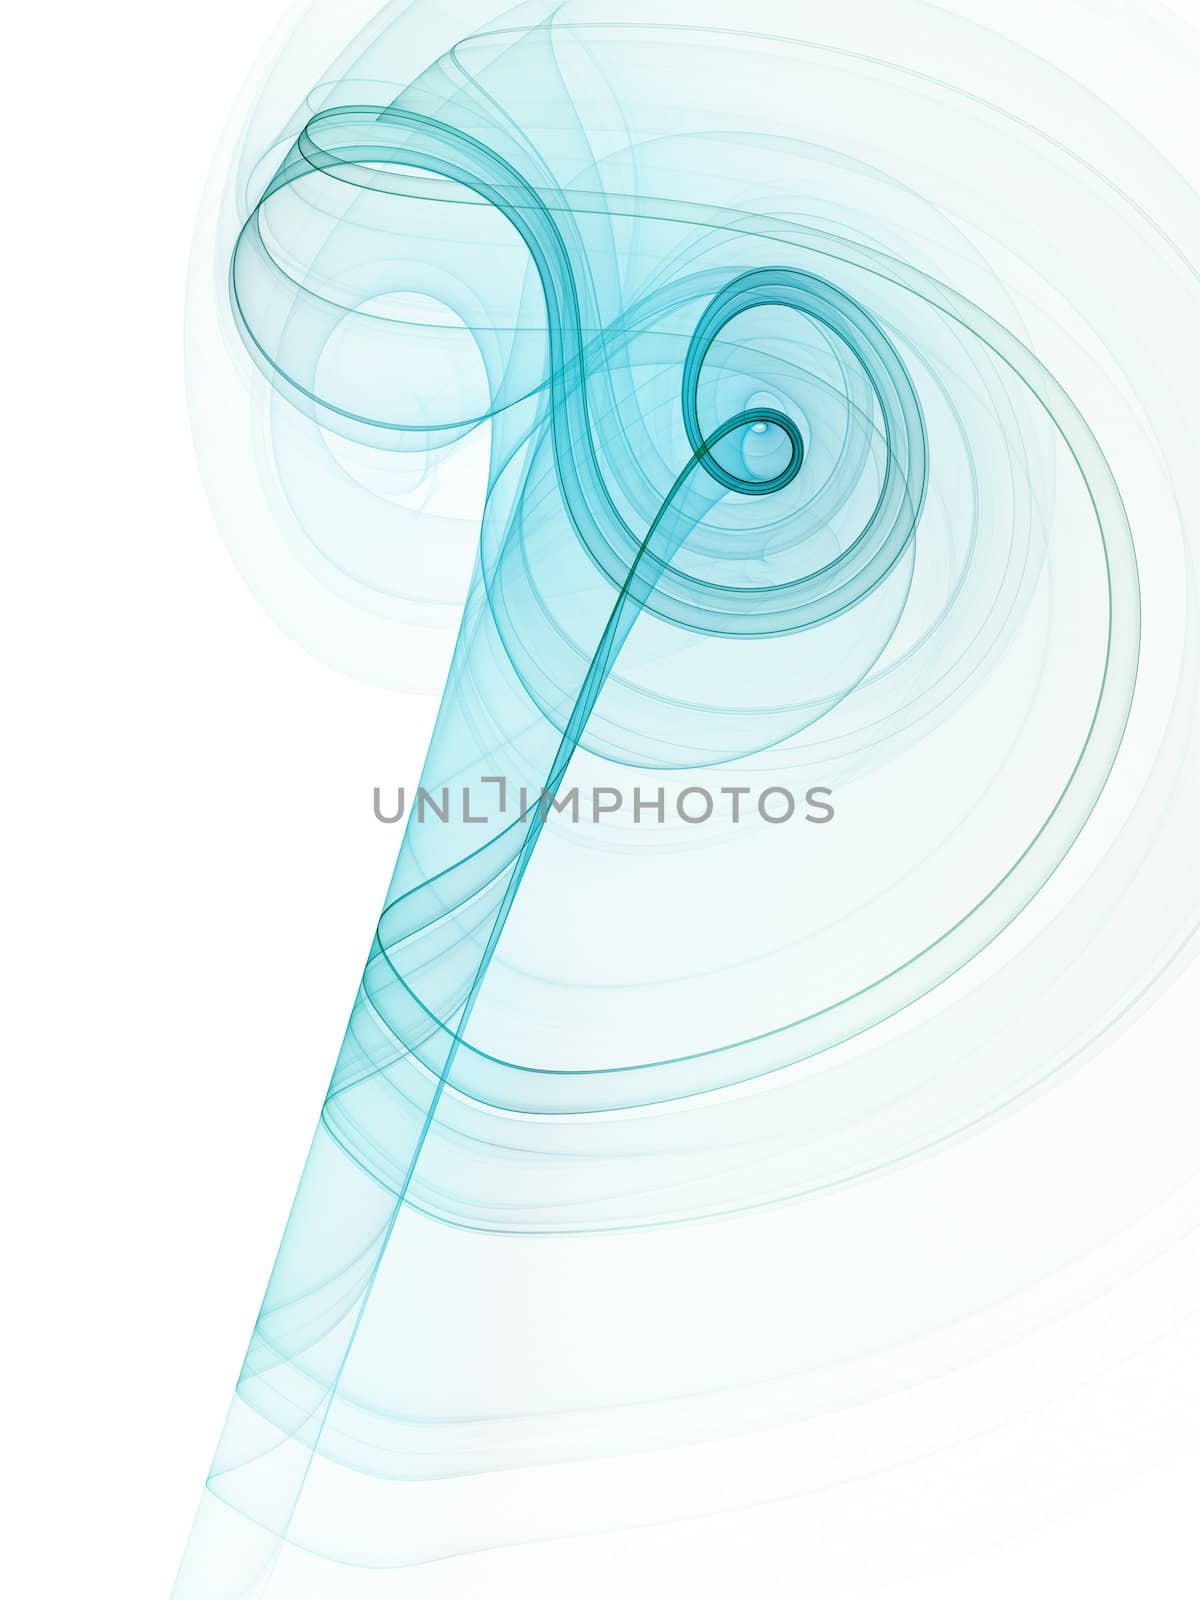 An illustration of a nice abstract fractal graphic background